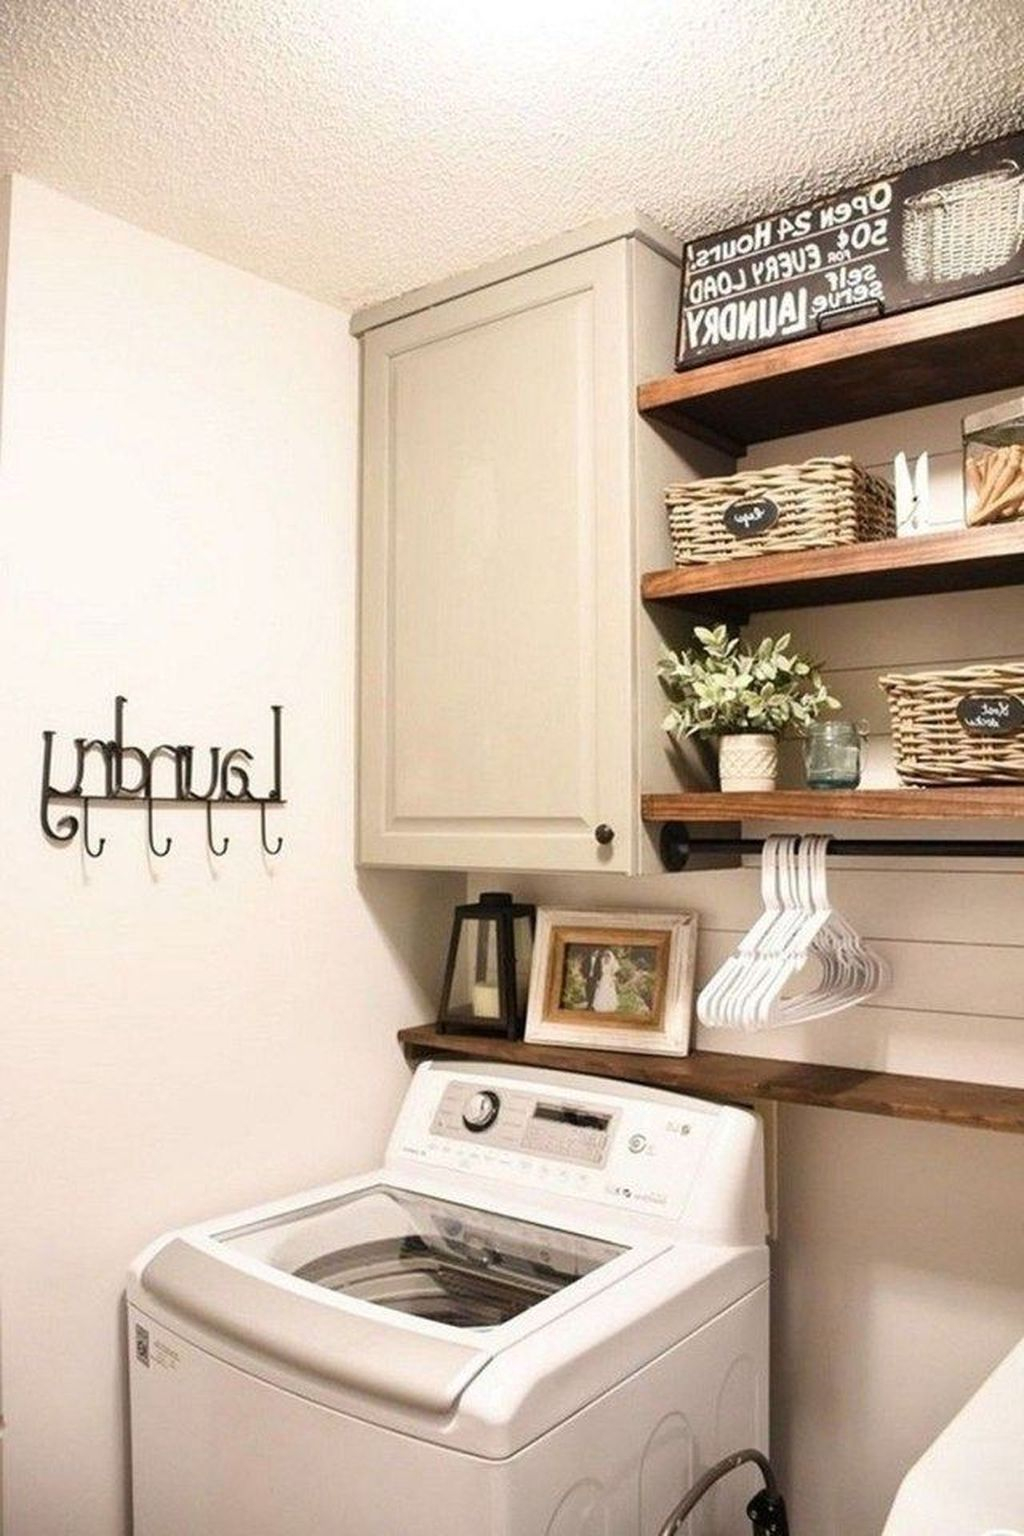 Favored Laundry Room Organization Ideas To Try 31